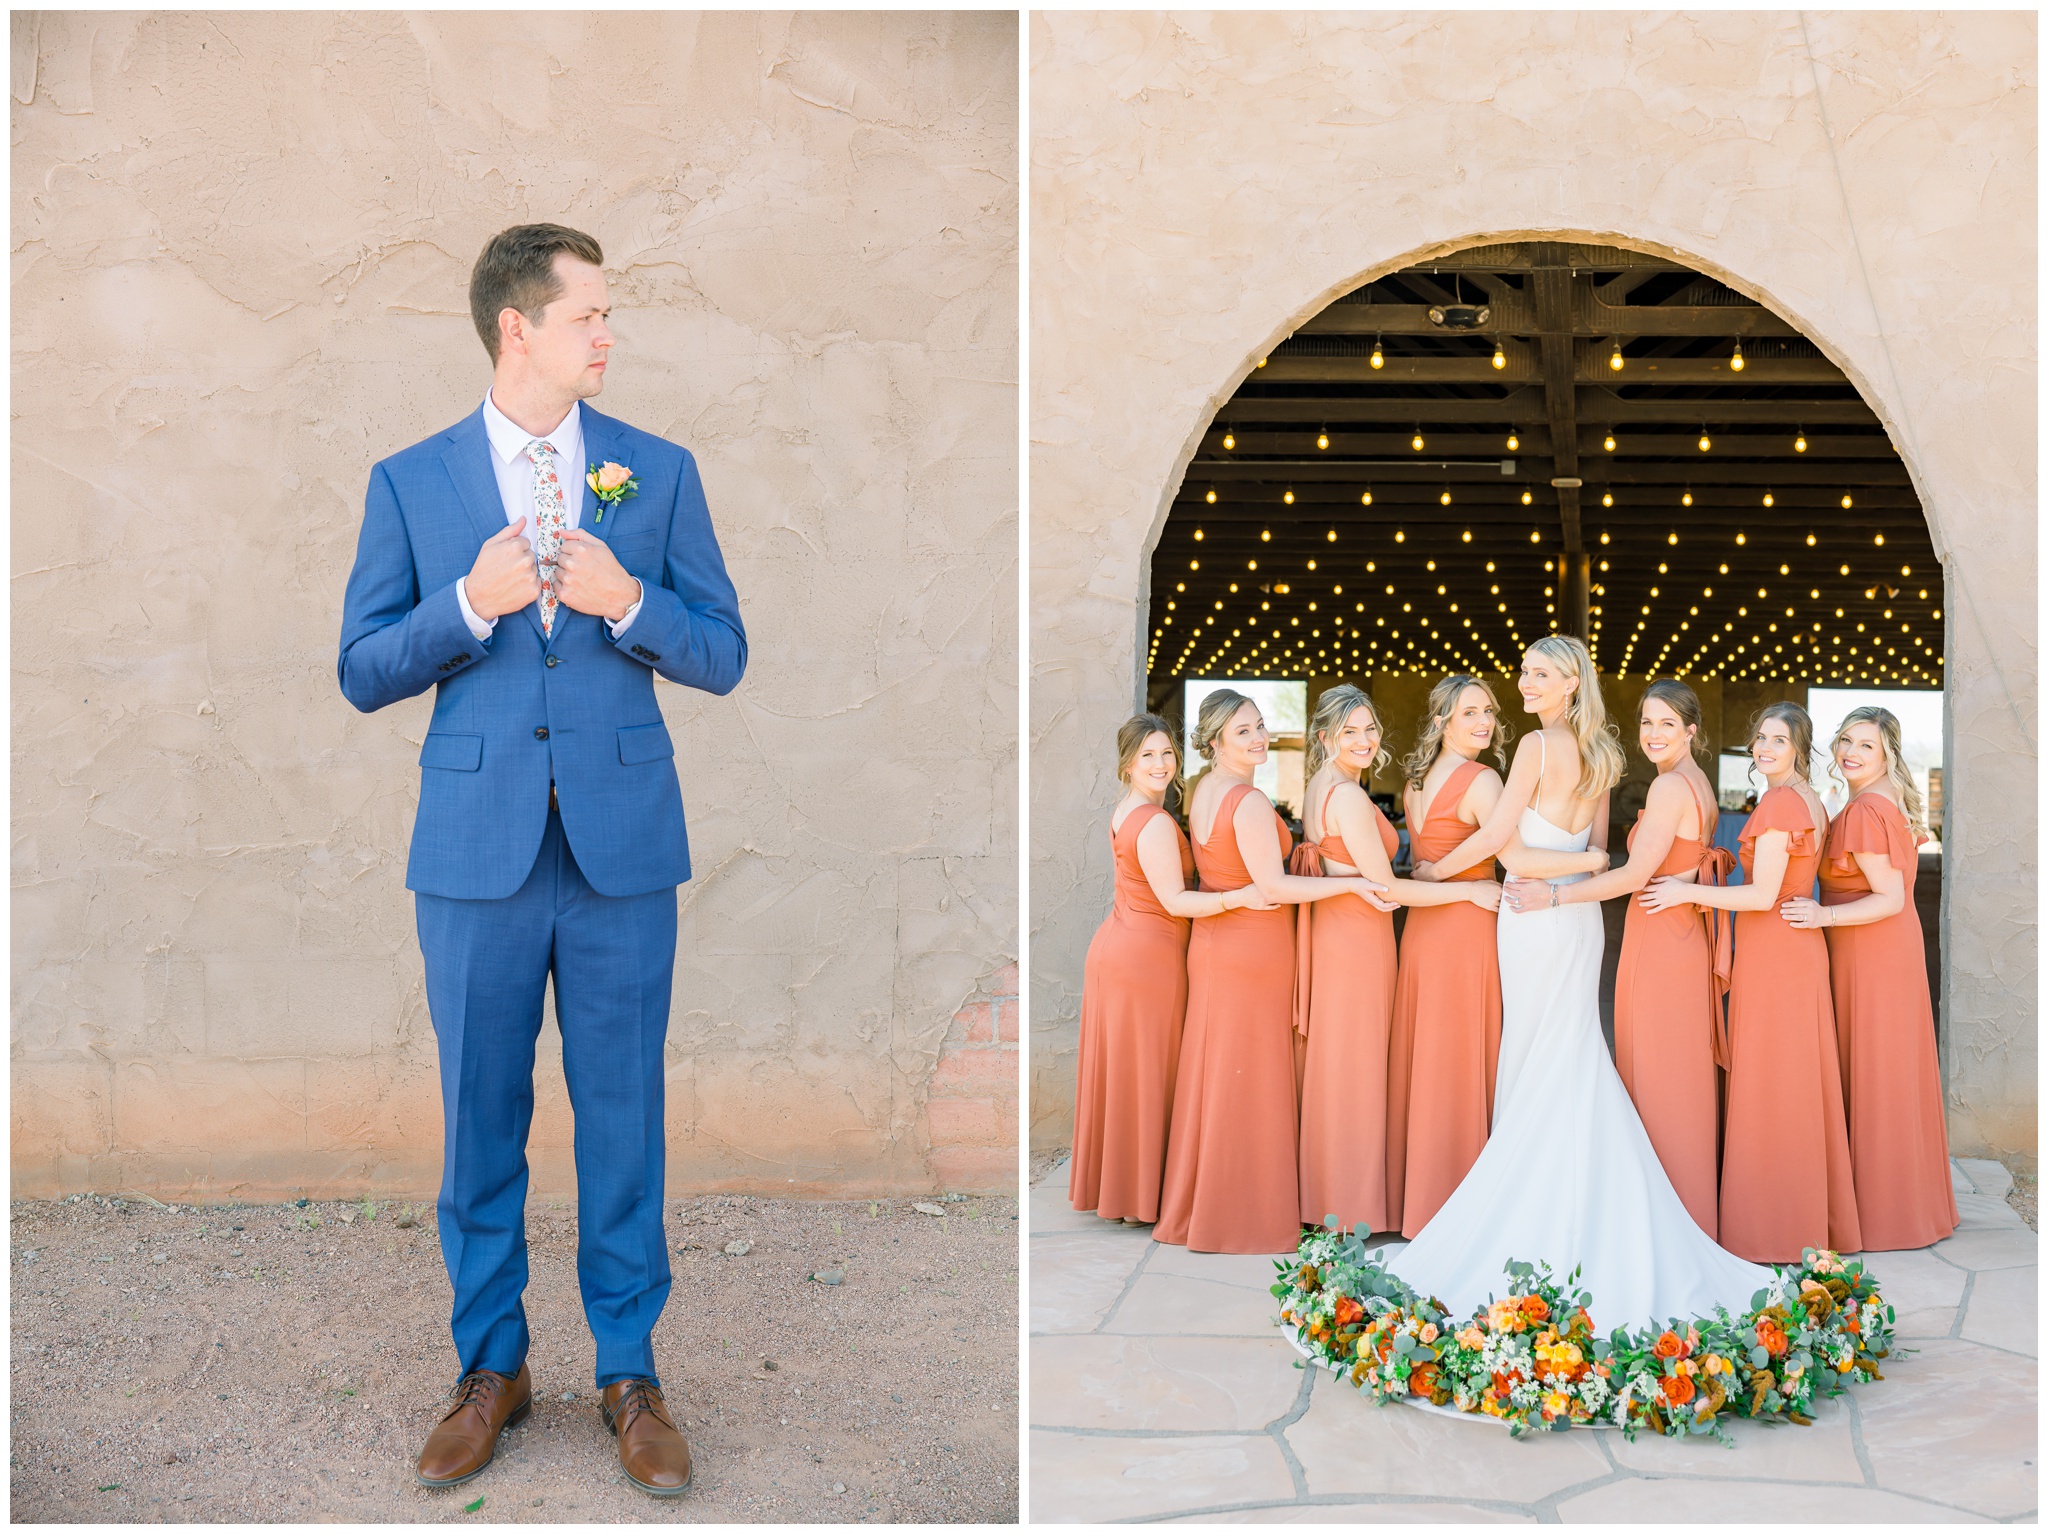 Groom portrait in navy suit, bridesmaids and bride with florals on brides train